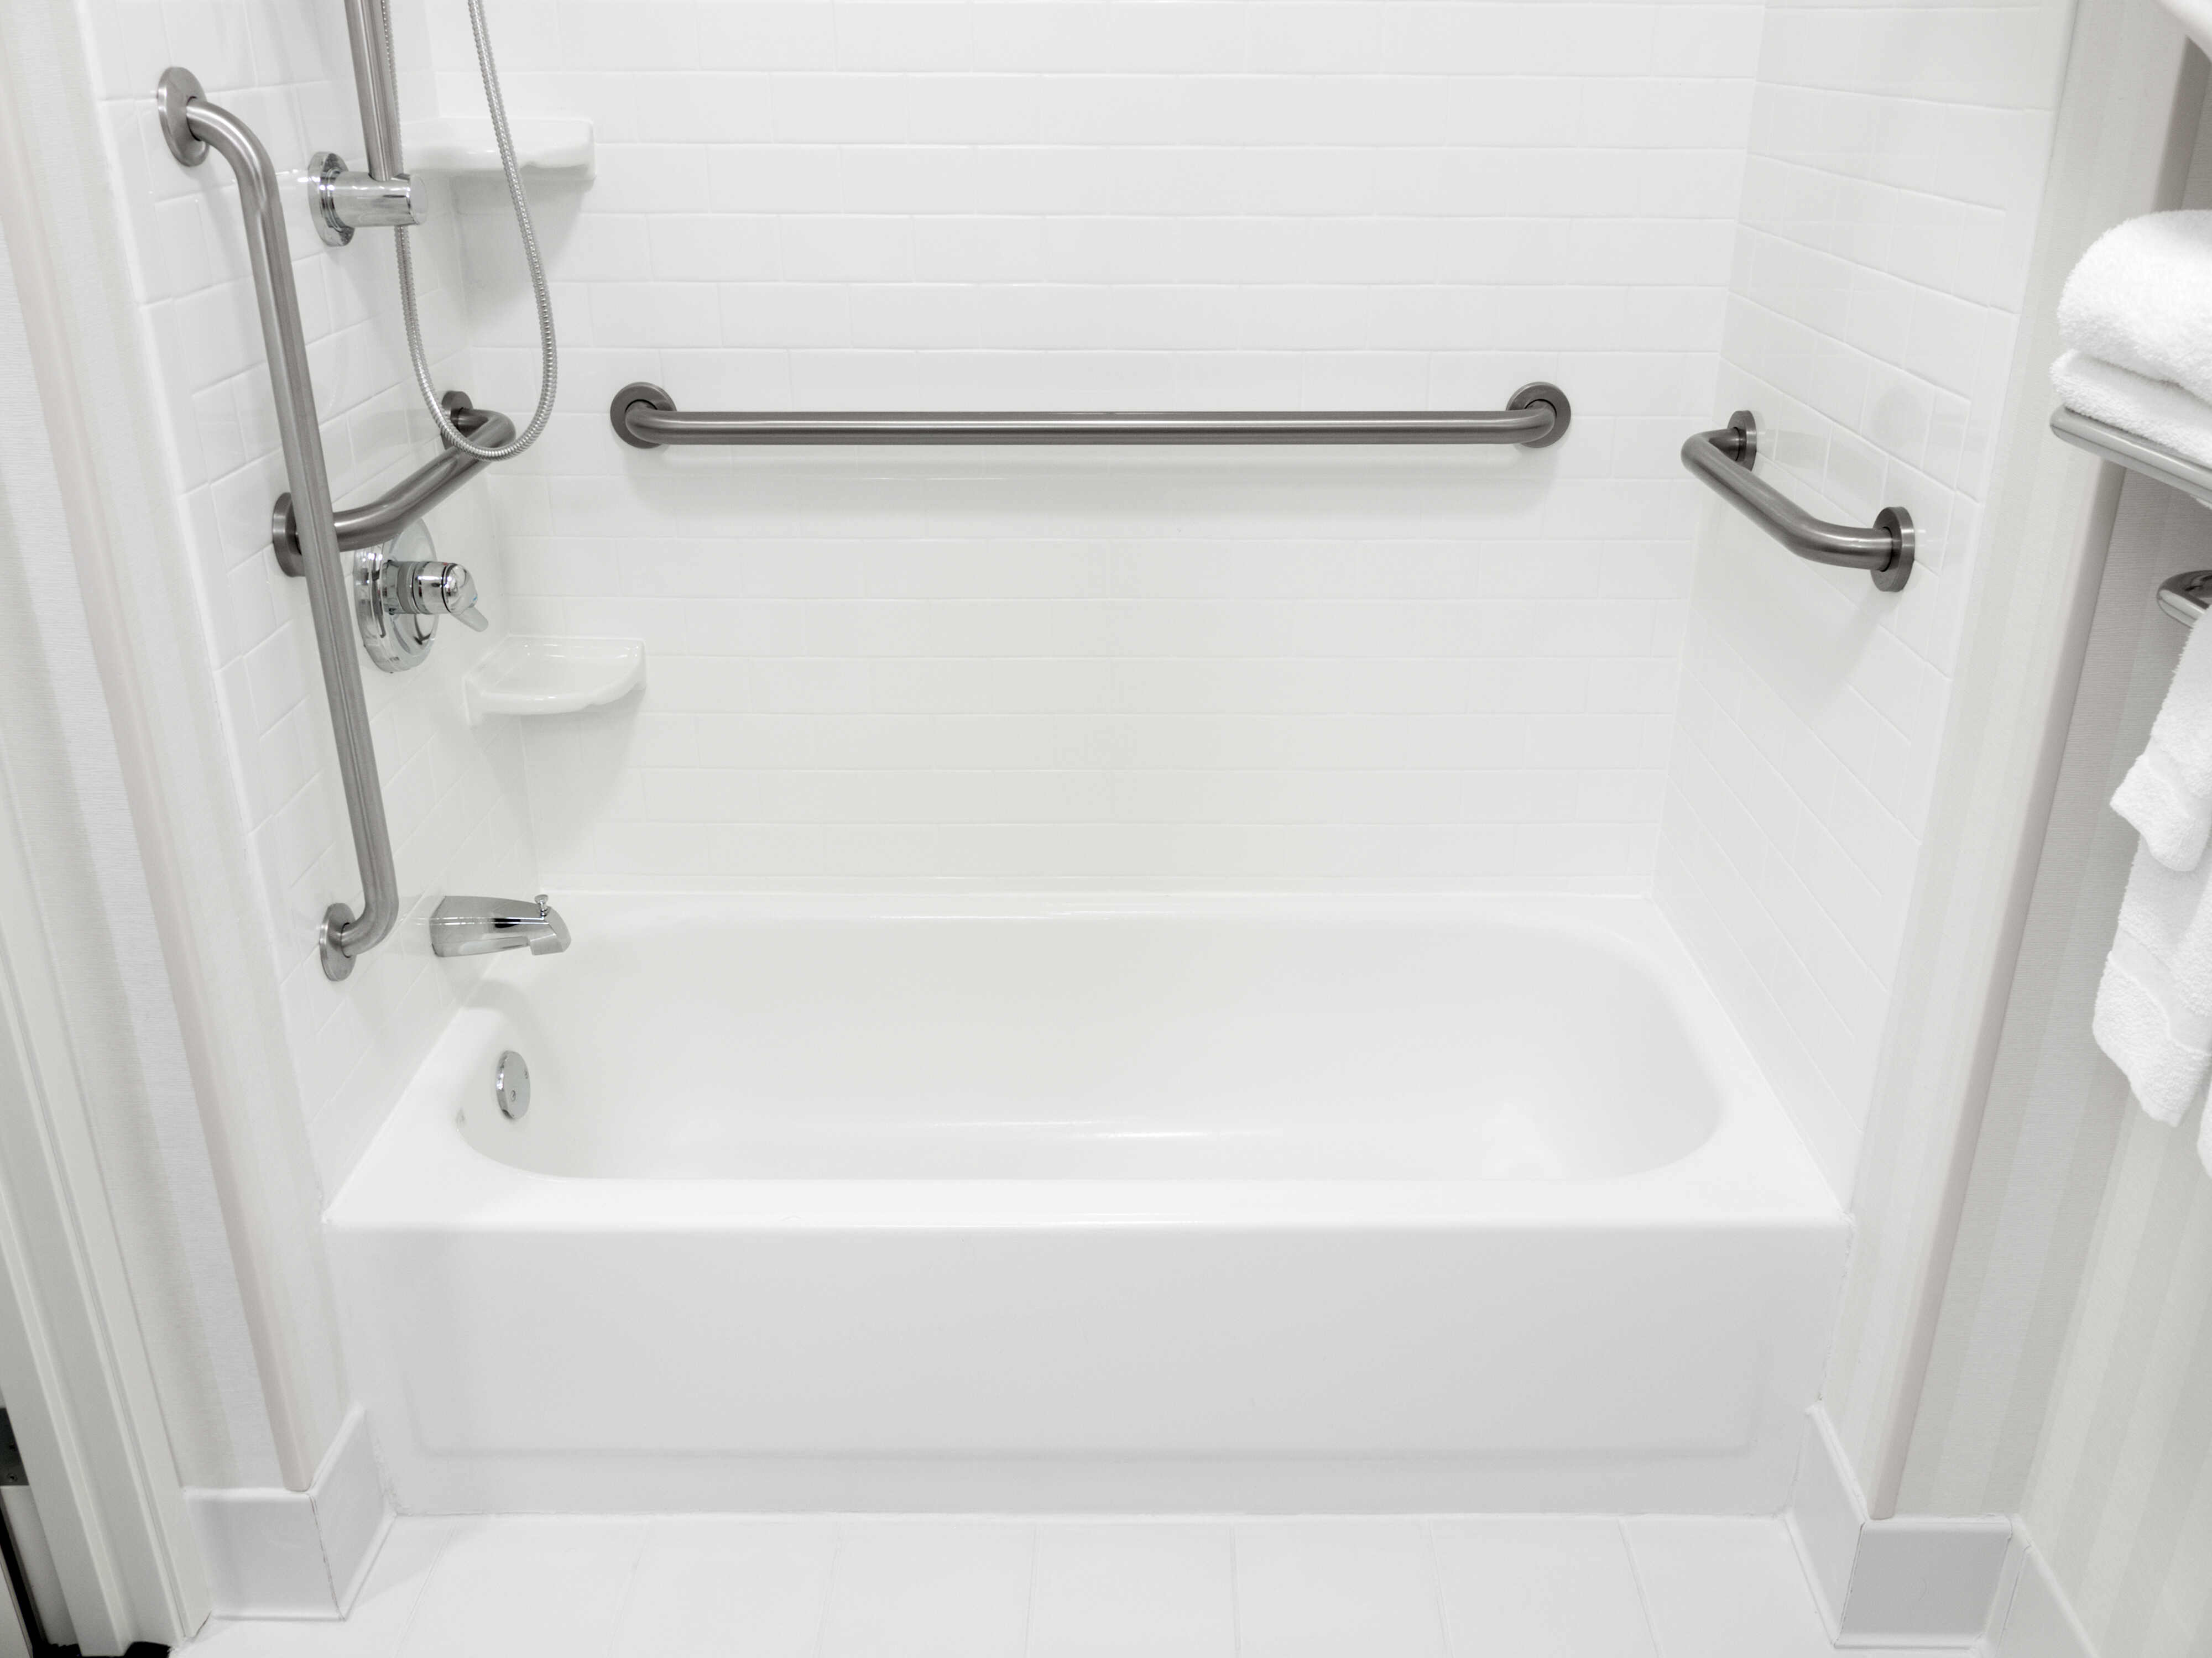 How To Replace A Bathtub In A Mobile Home